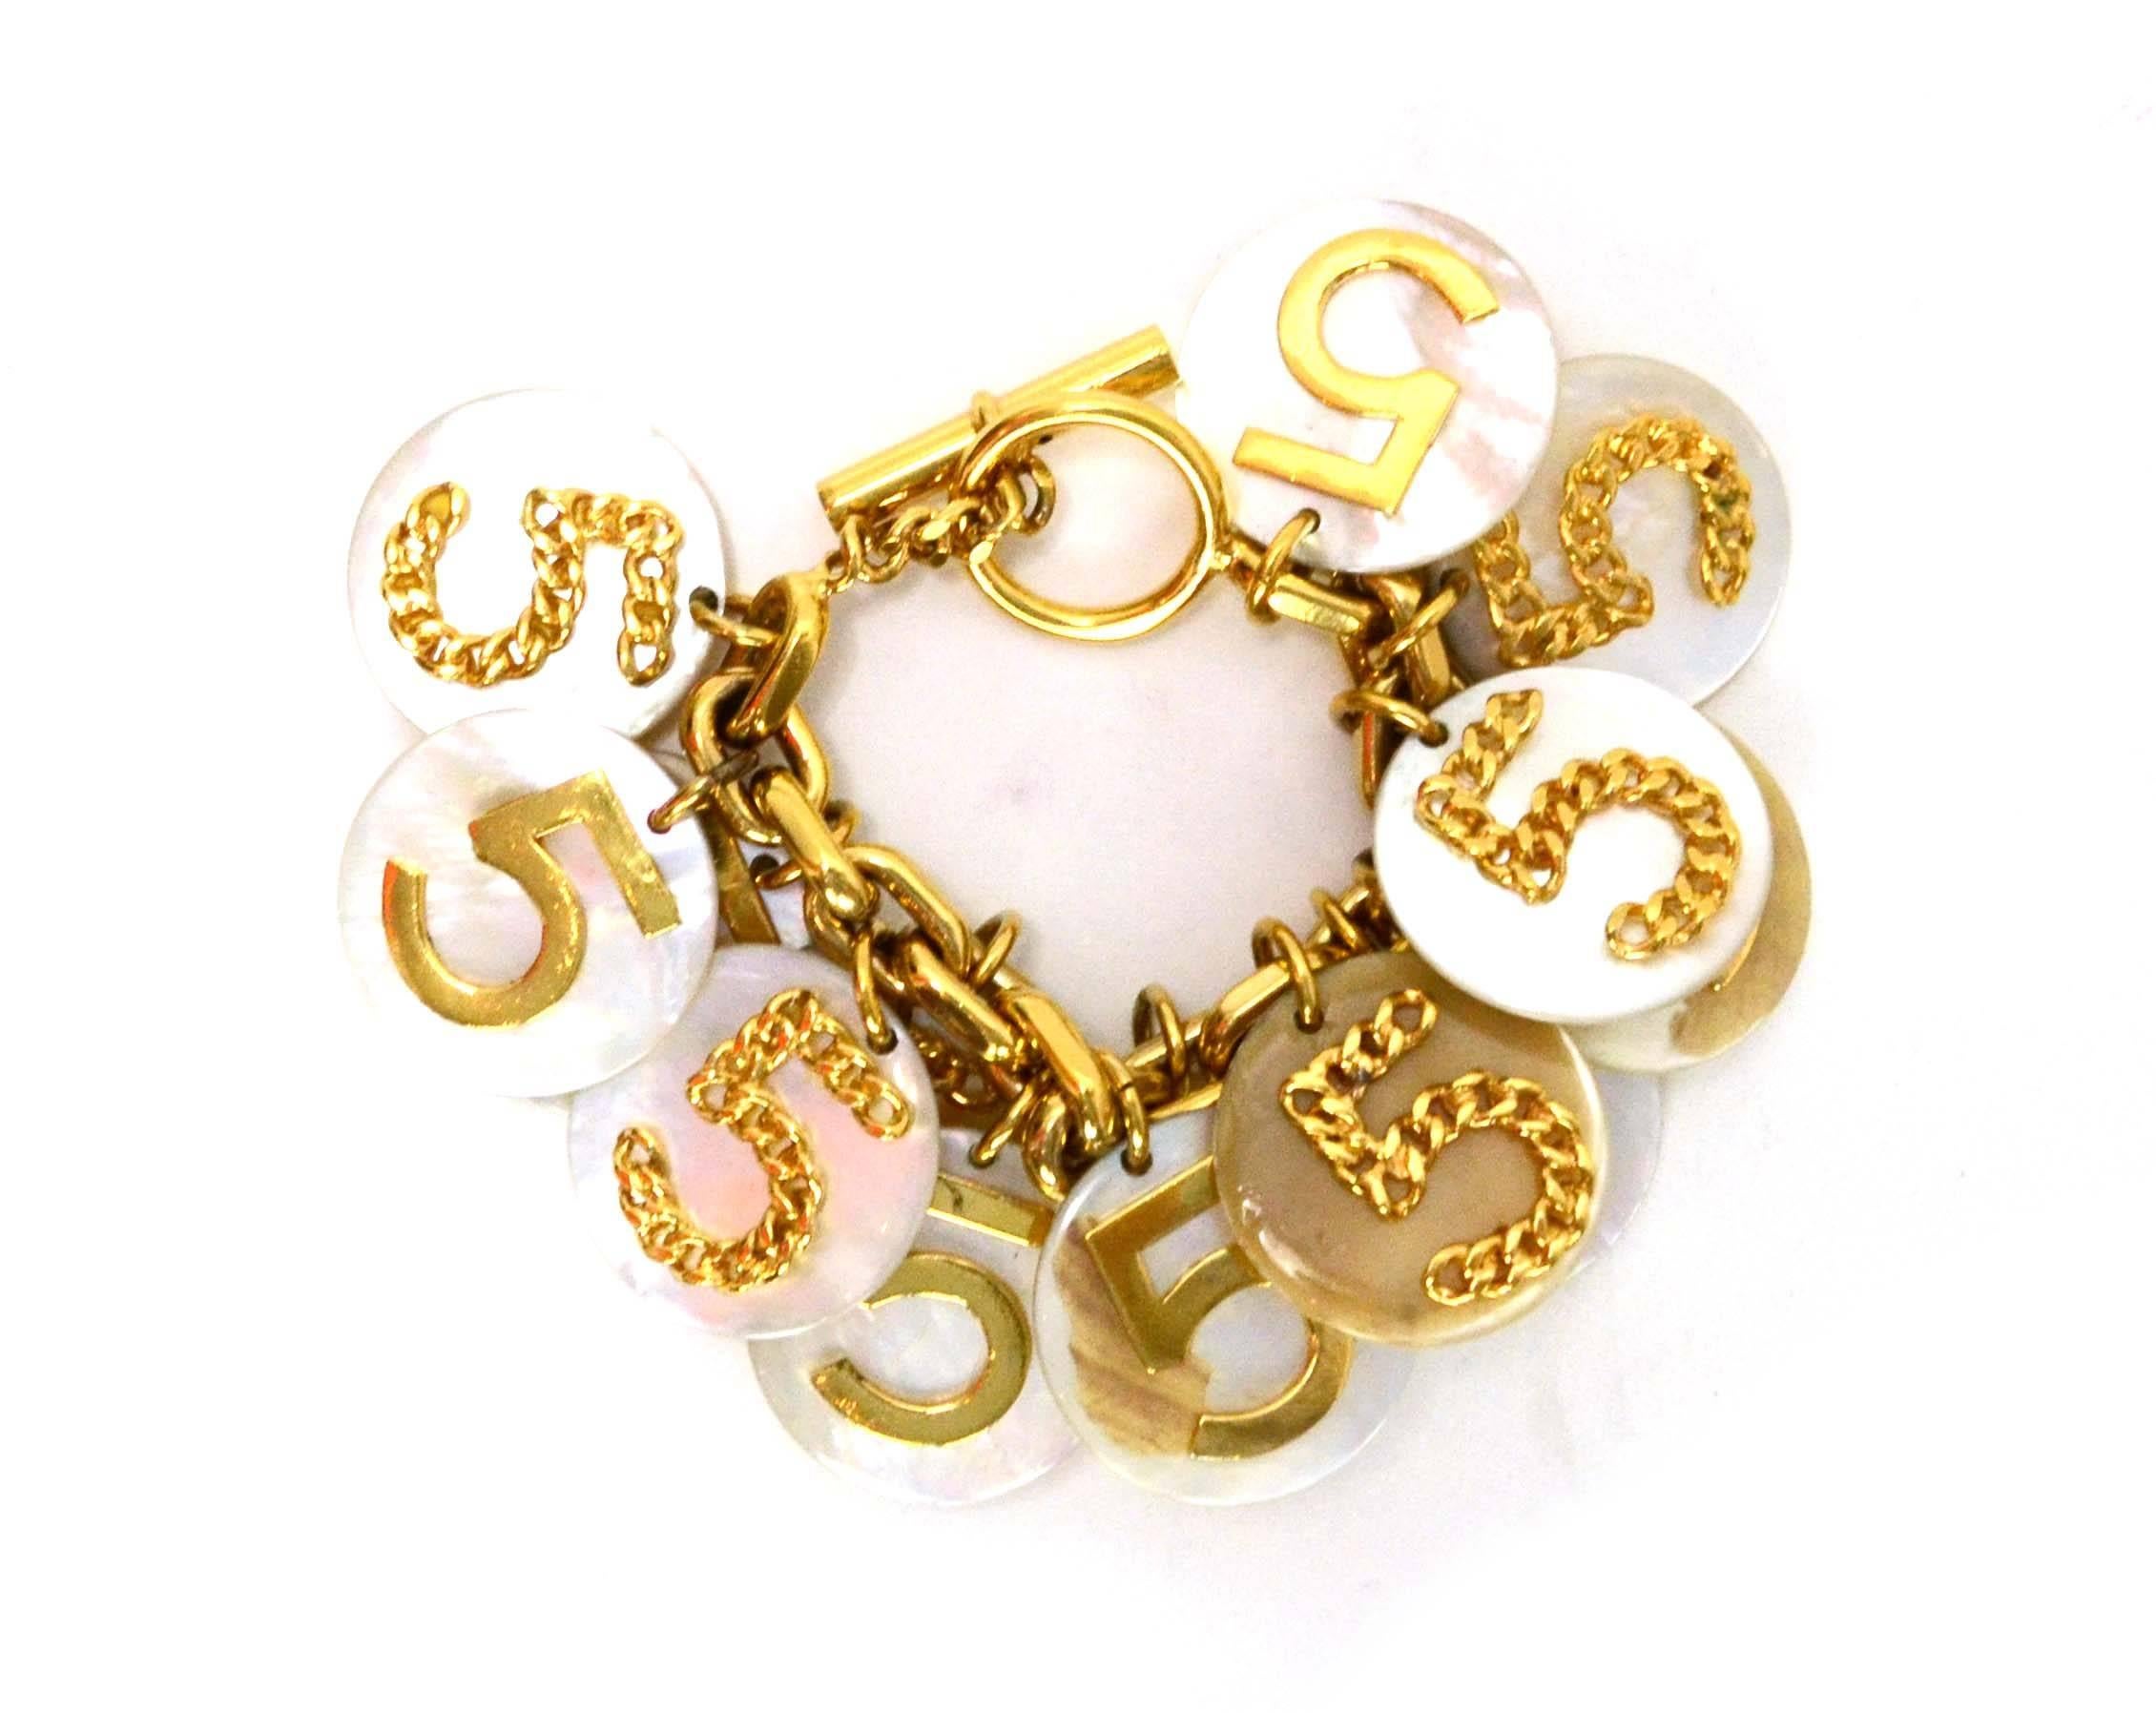 Chanel Vintage '60s Mother of Pearl #5 Charm Bracelet 
Features goldtone 5's on each MOP disc with one side as a chain link 5

Color: Goldtone and iridescent ivory
Materials: Mother of pearl and metal
Closure: Toggle closure
Stamp: